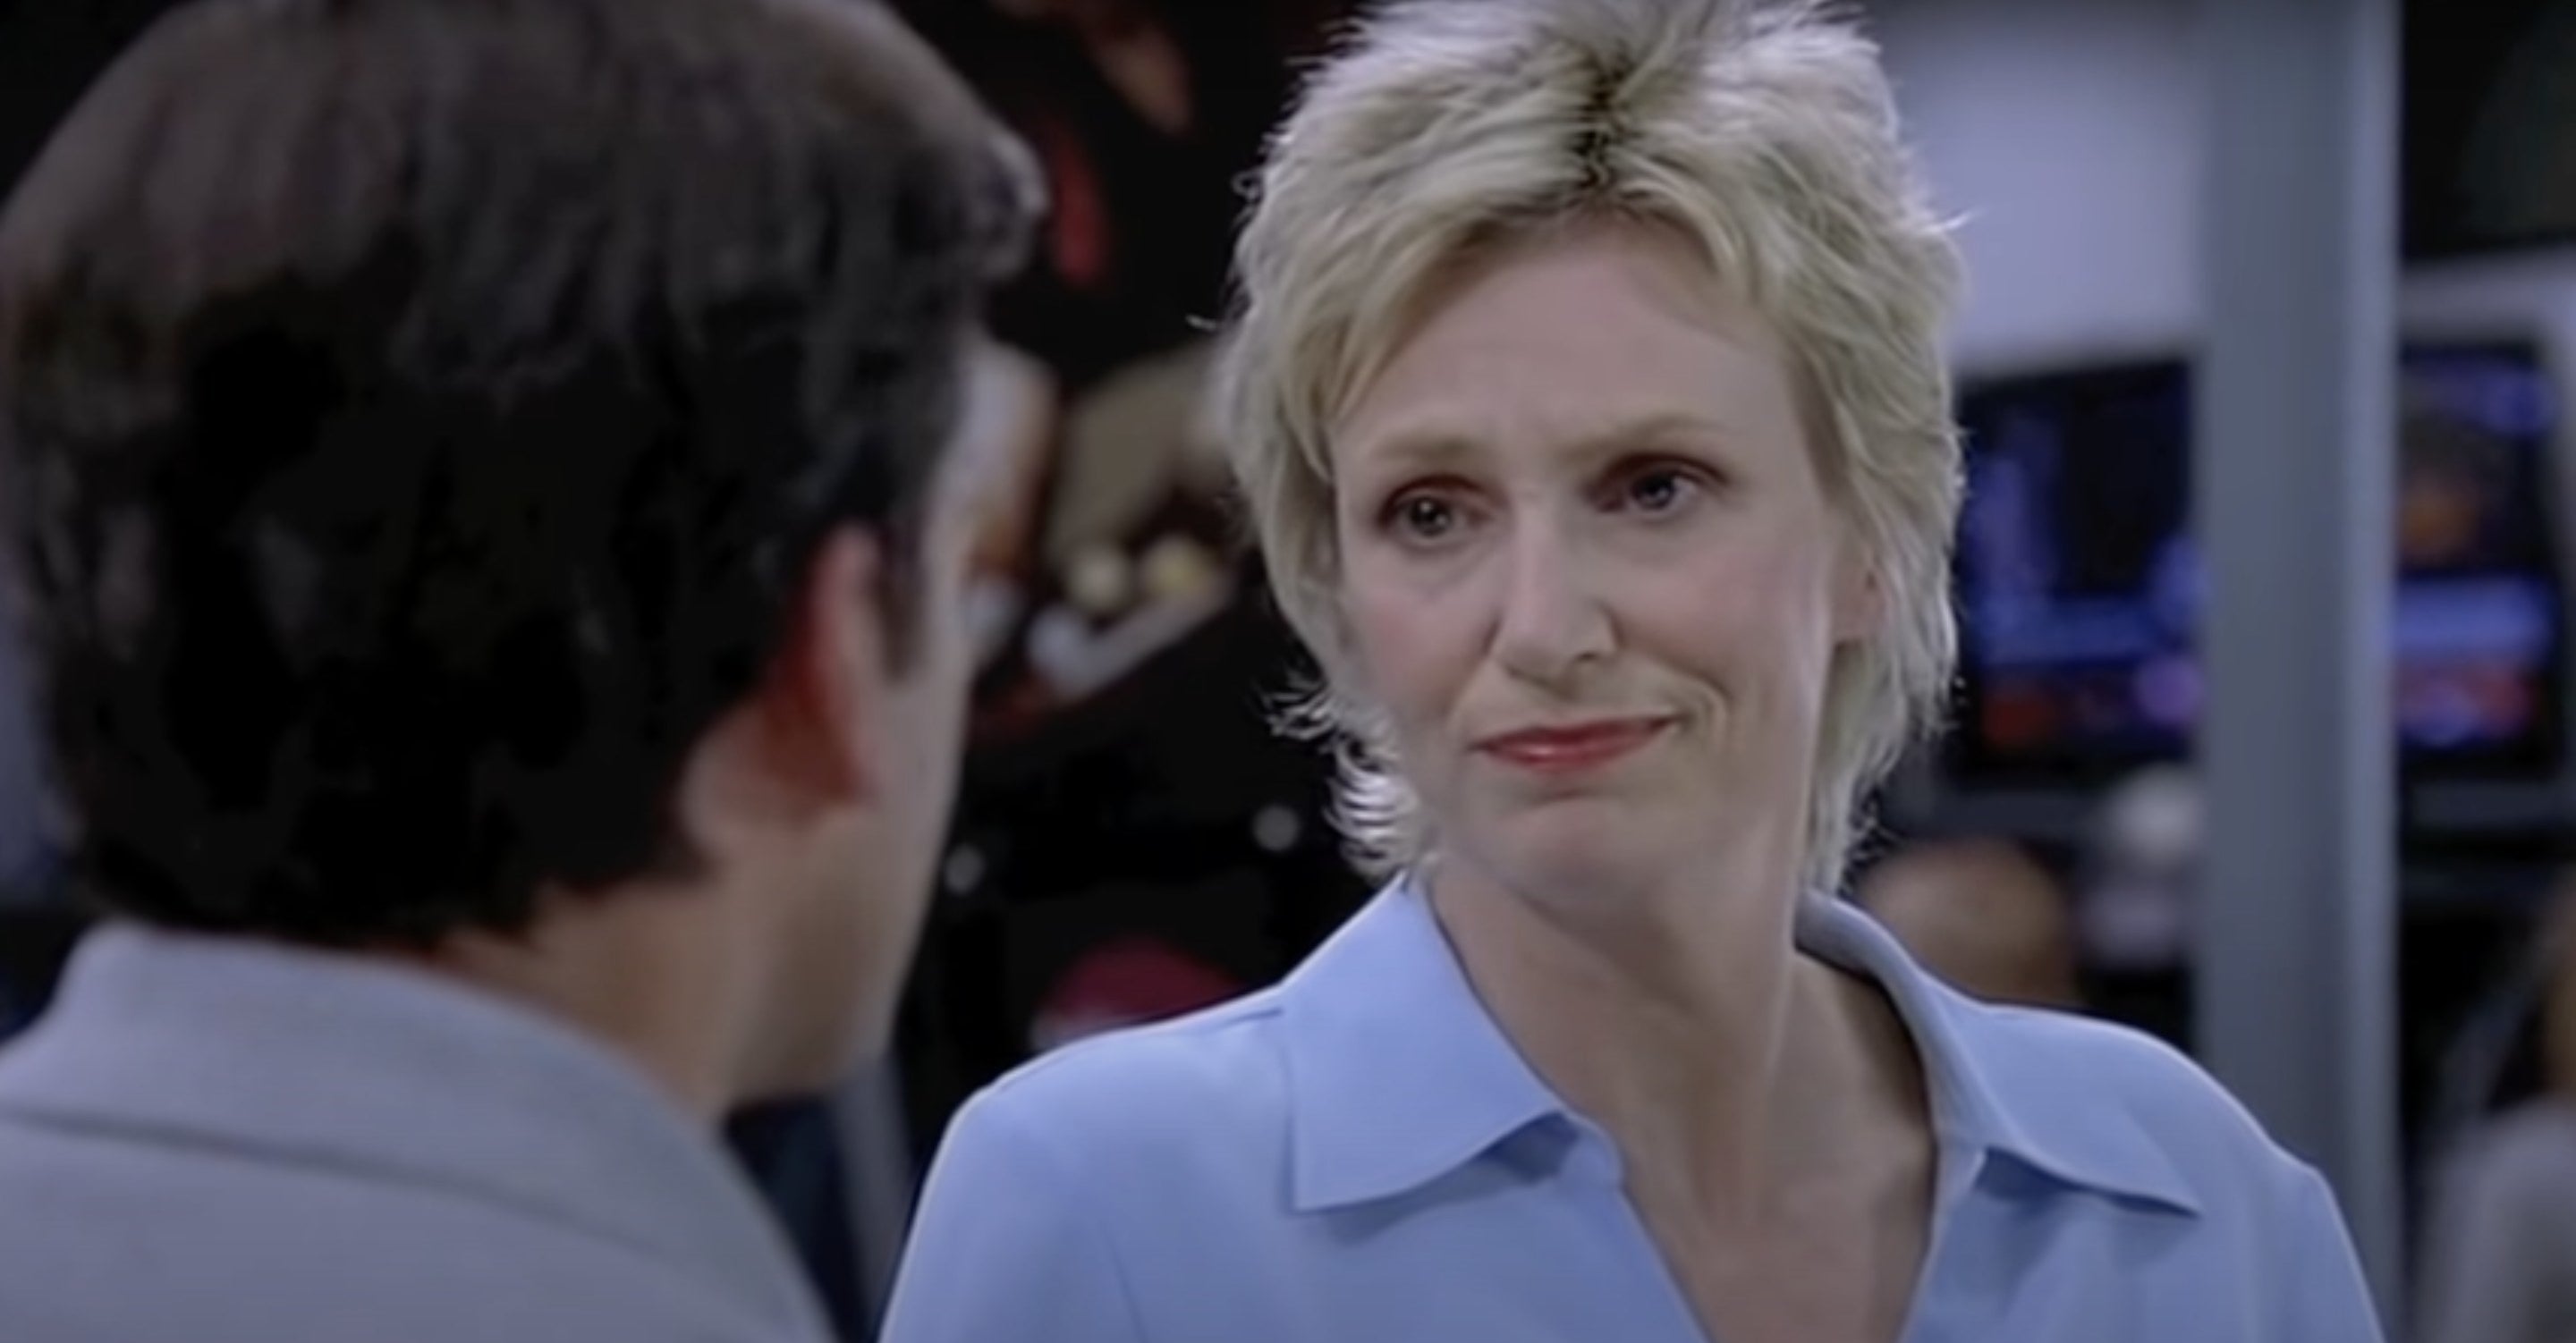 Woman stares disappointingly at a man in &quot;The 40-Year-Old Virgin&quot;